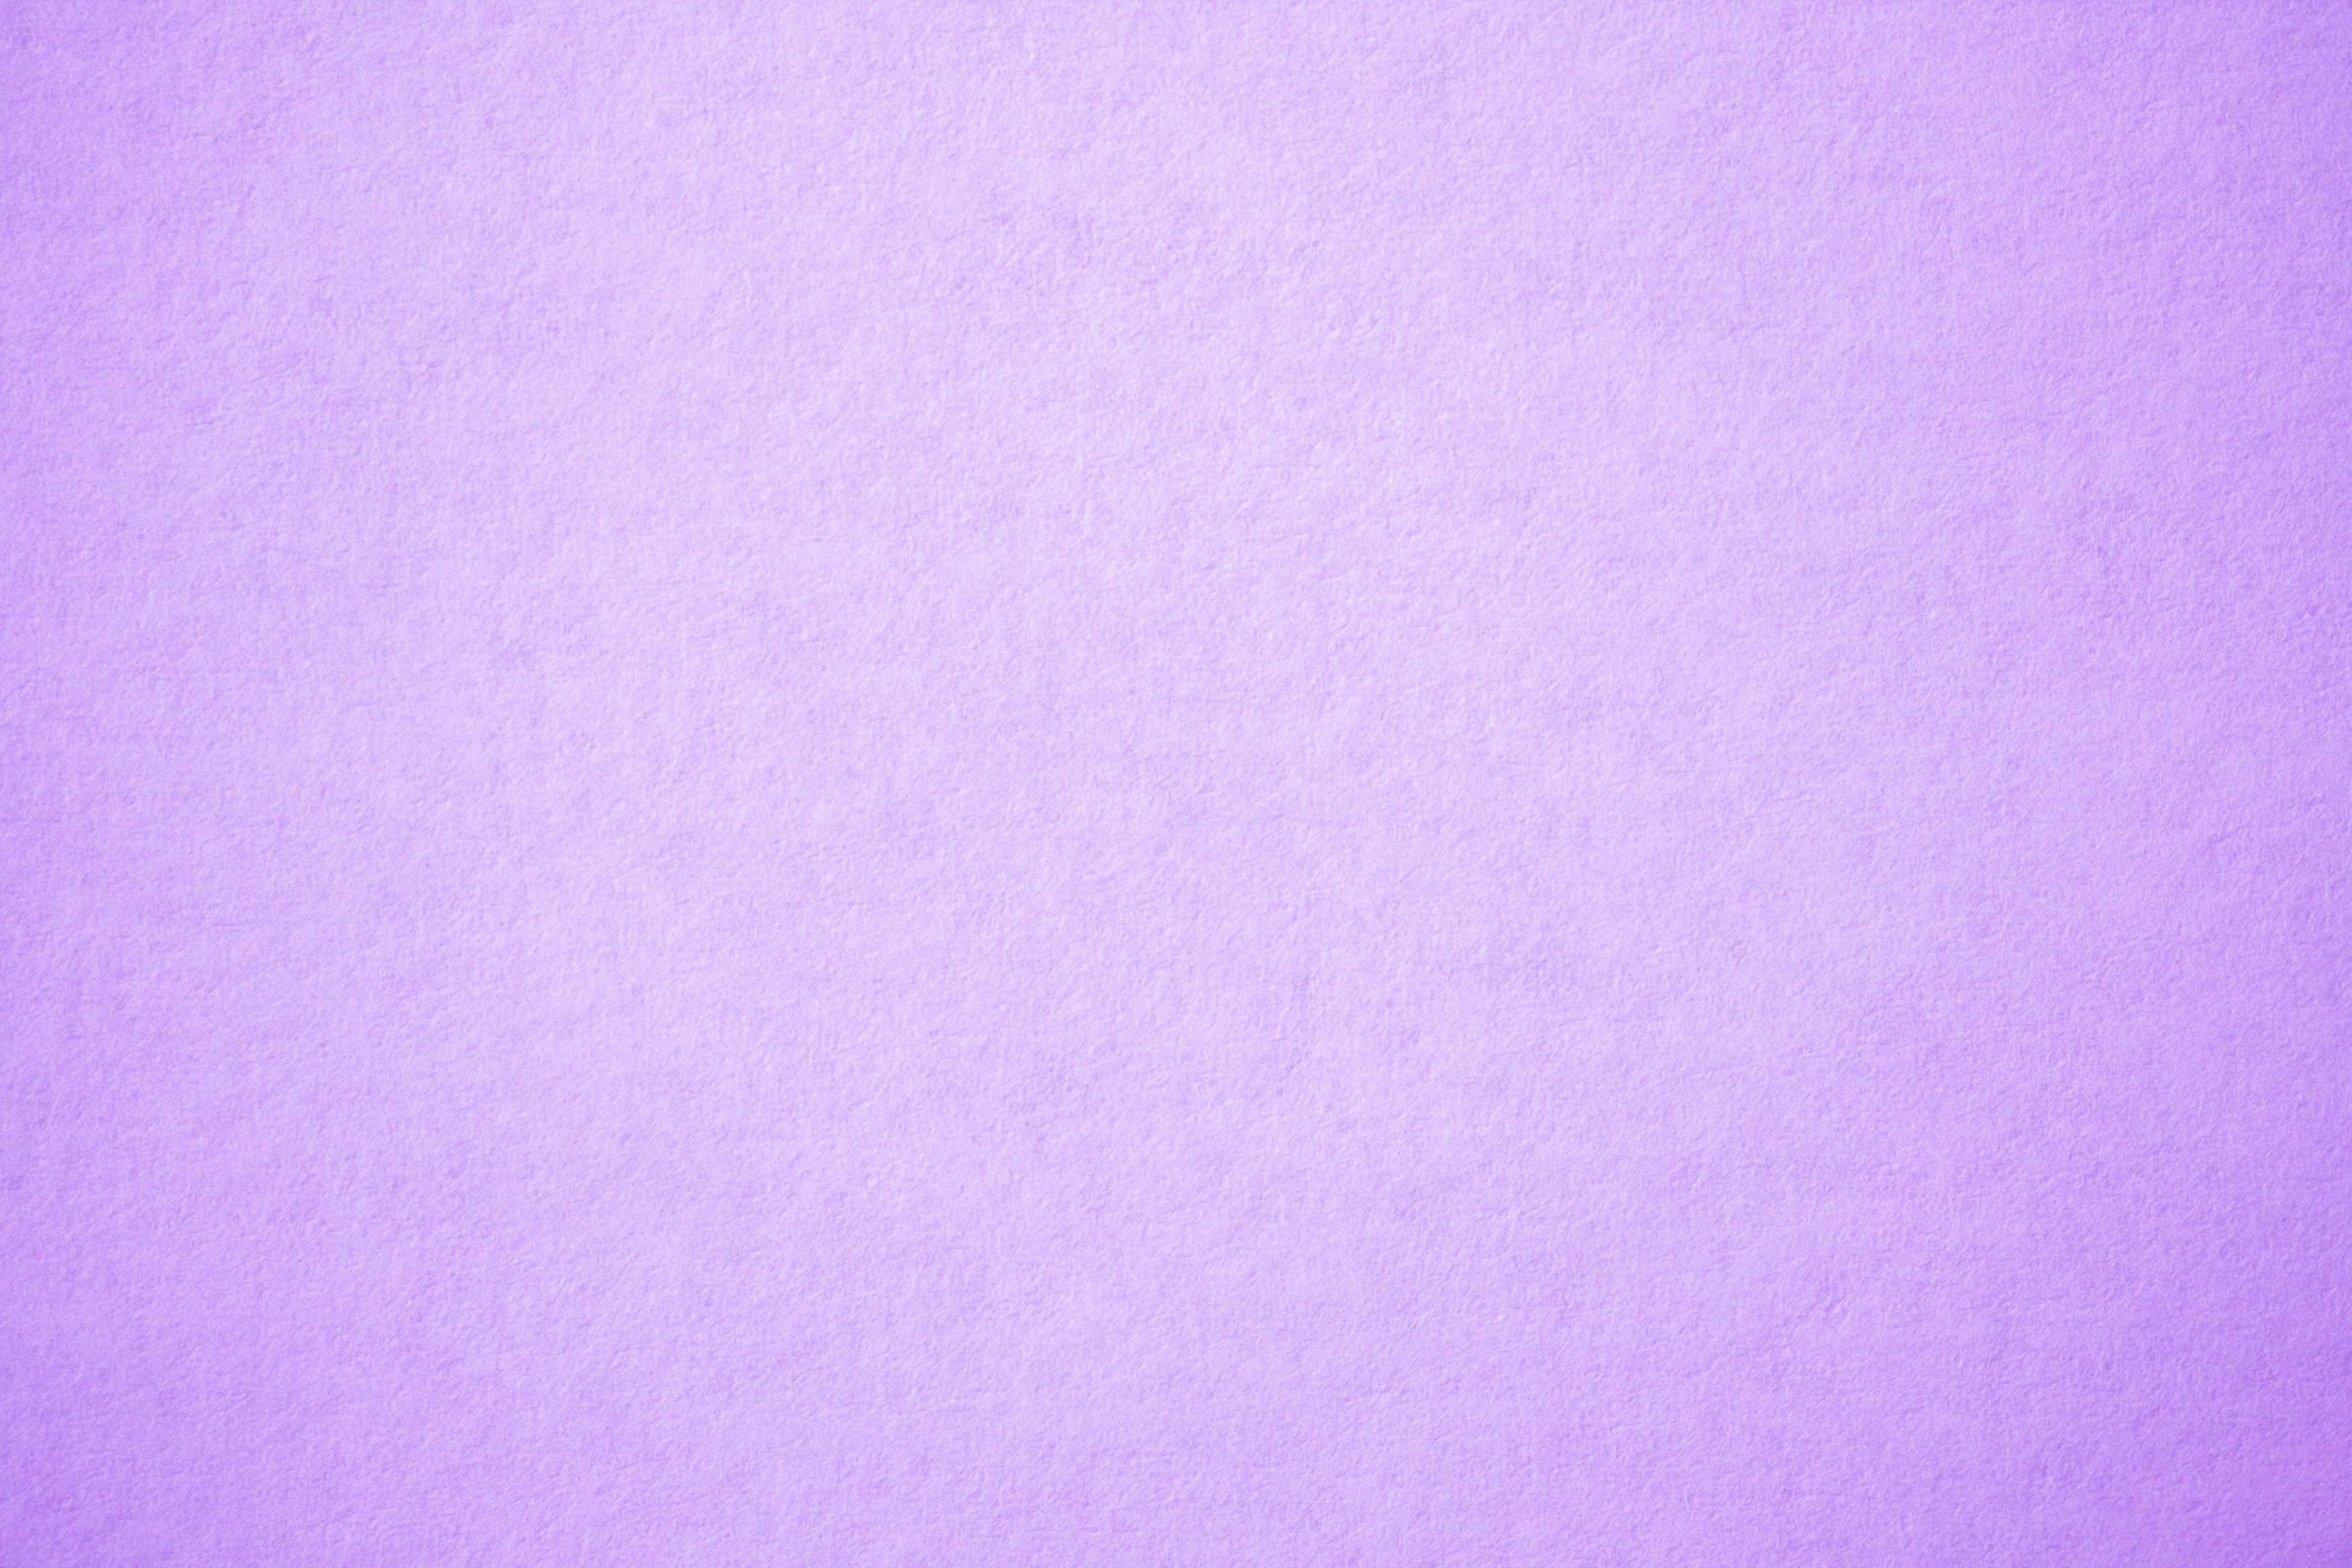 Beautiful and stunning Violet background 1080p Wallpapers for your devices